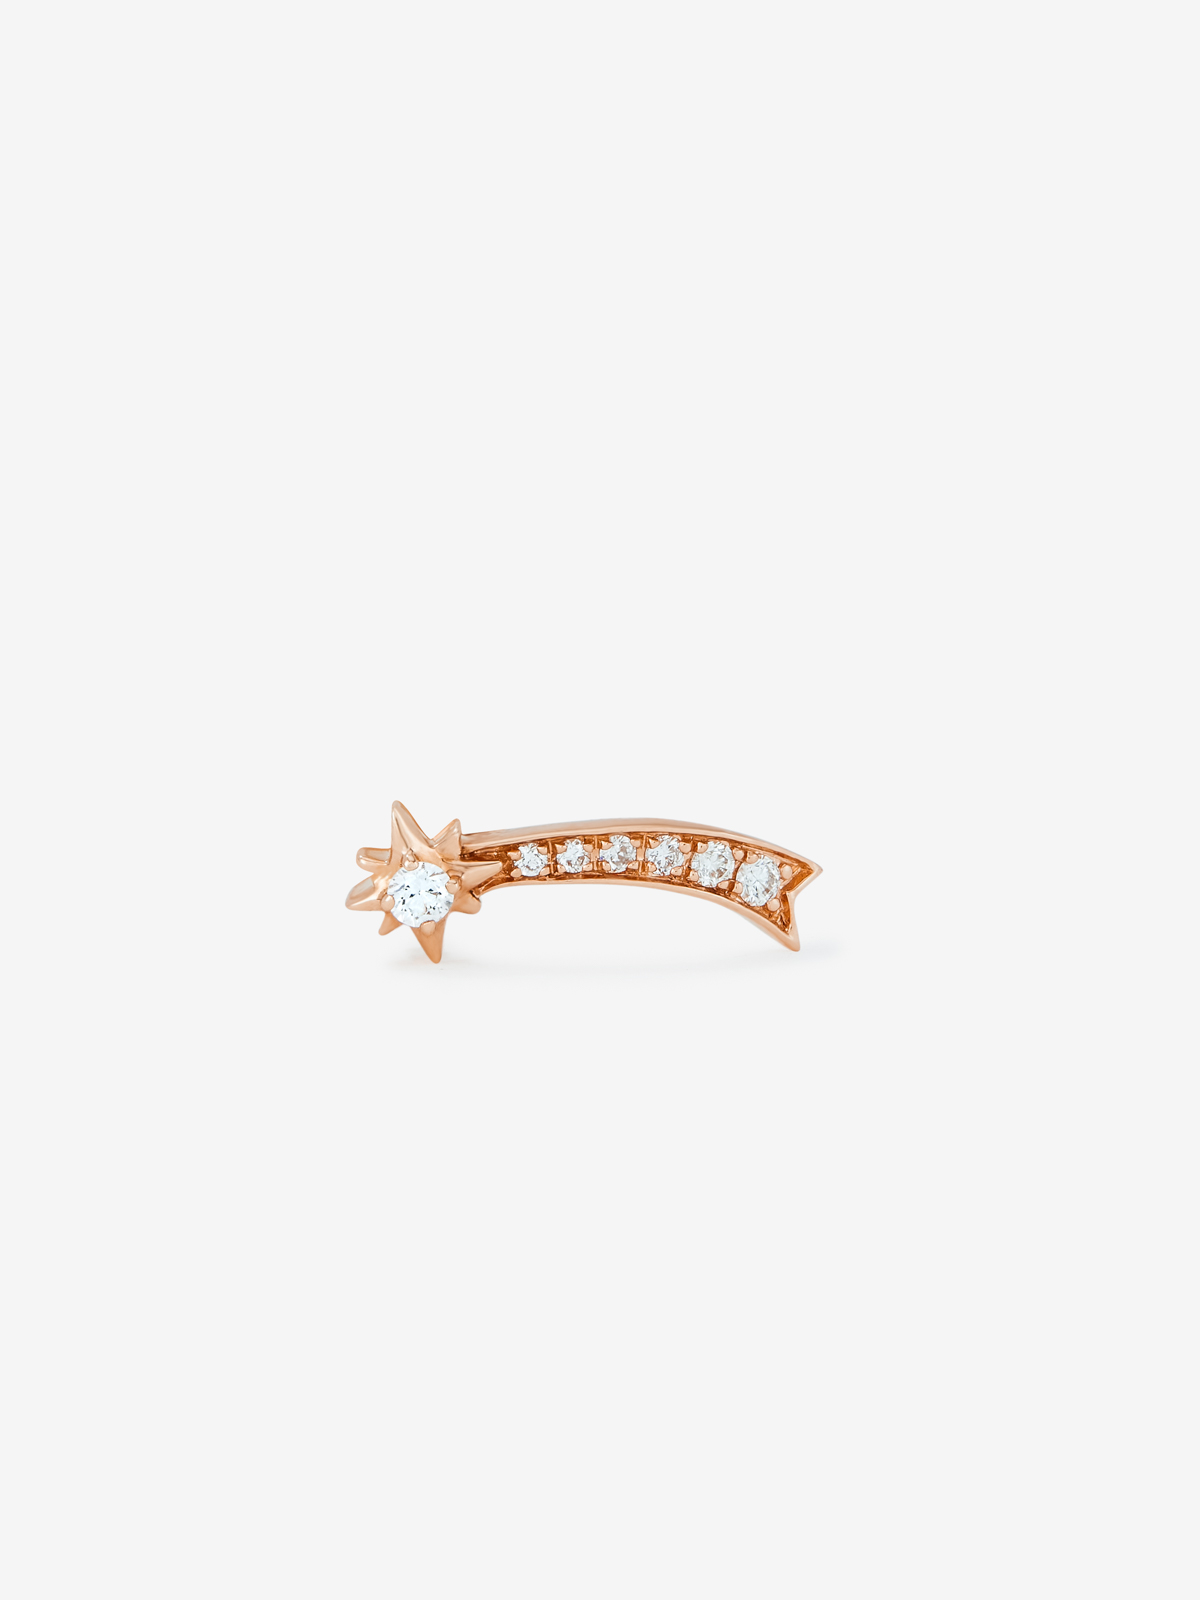 Individual right climber shooting star earring made of 18K rose gold with diamonds